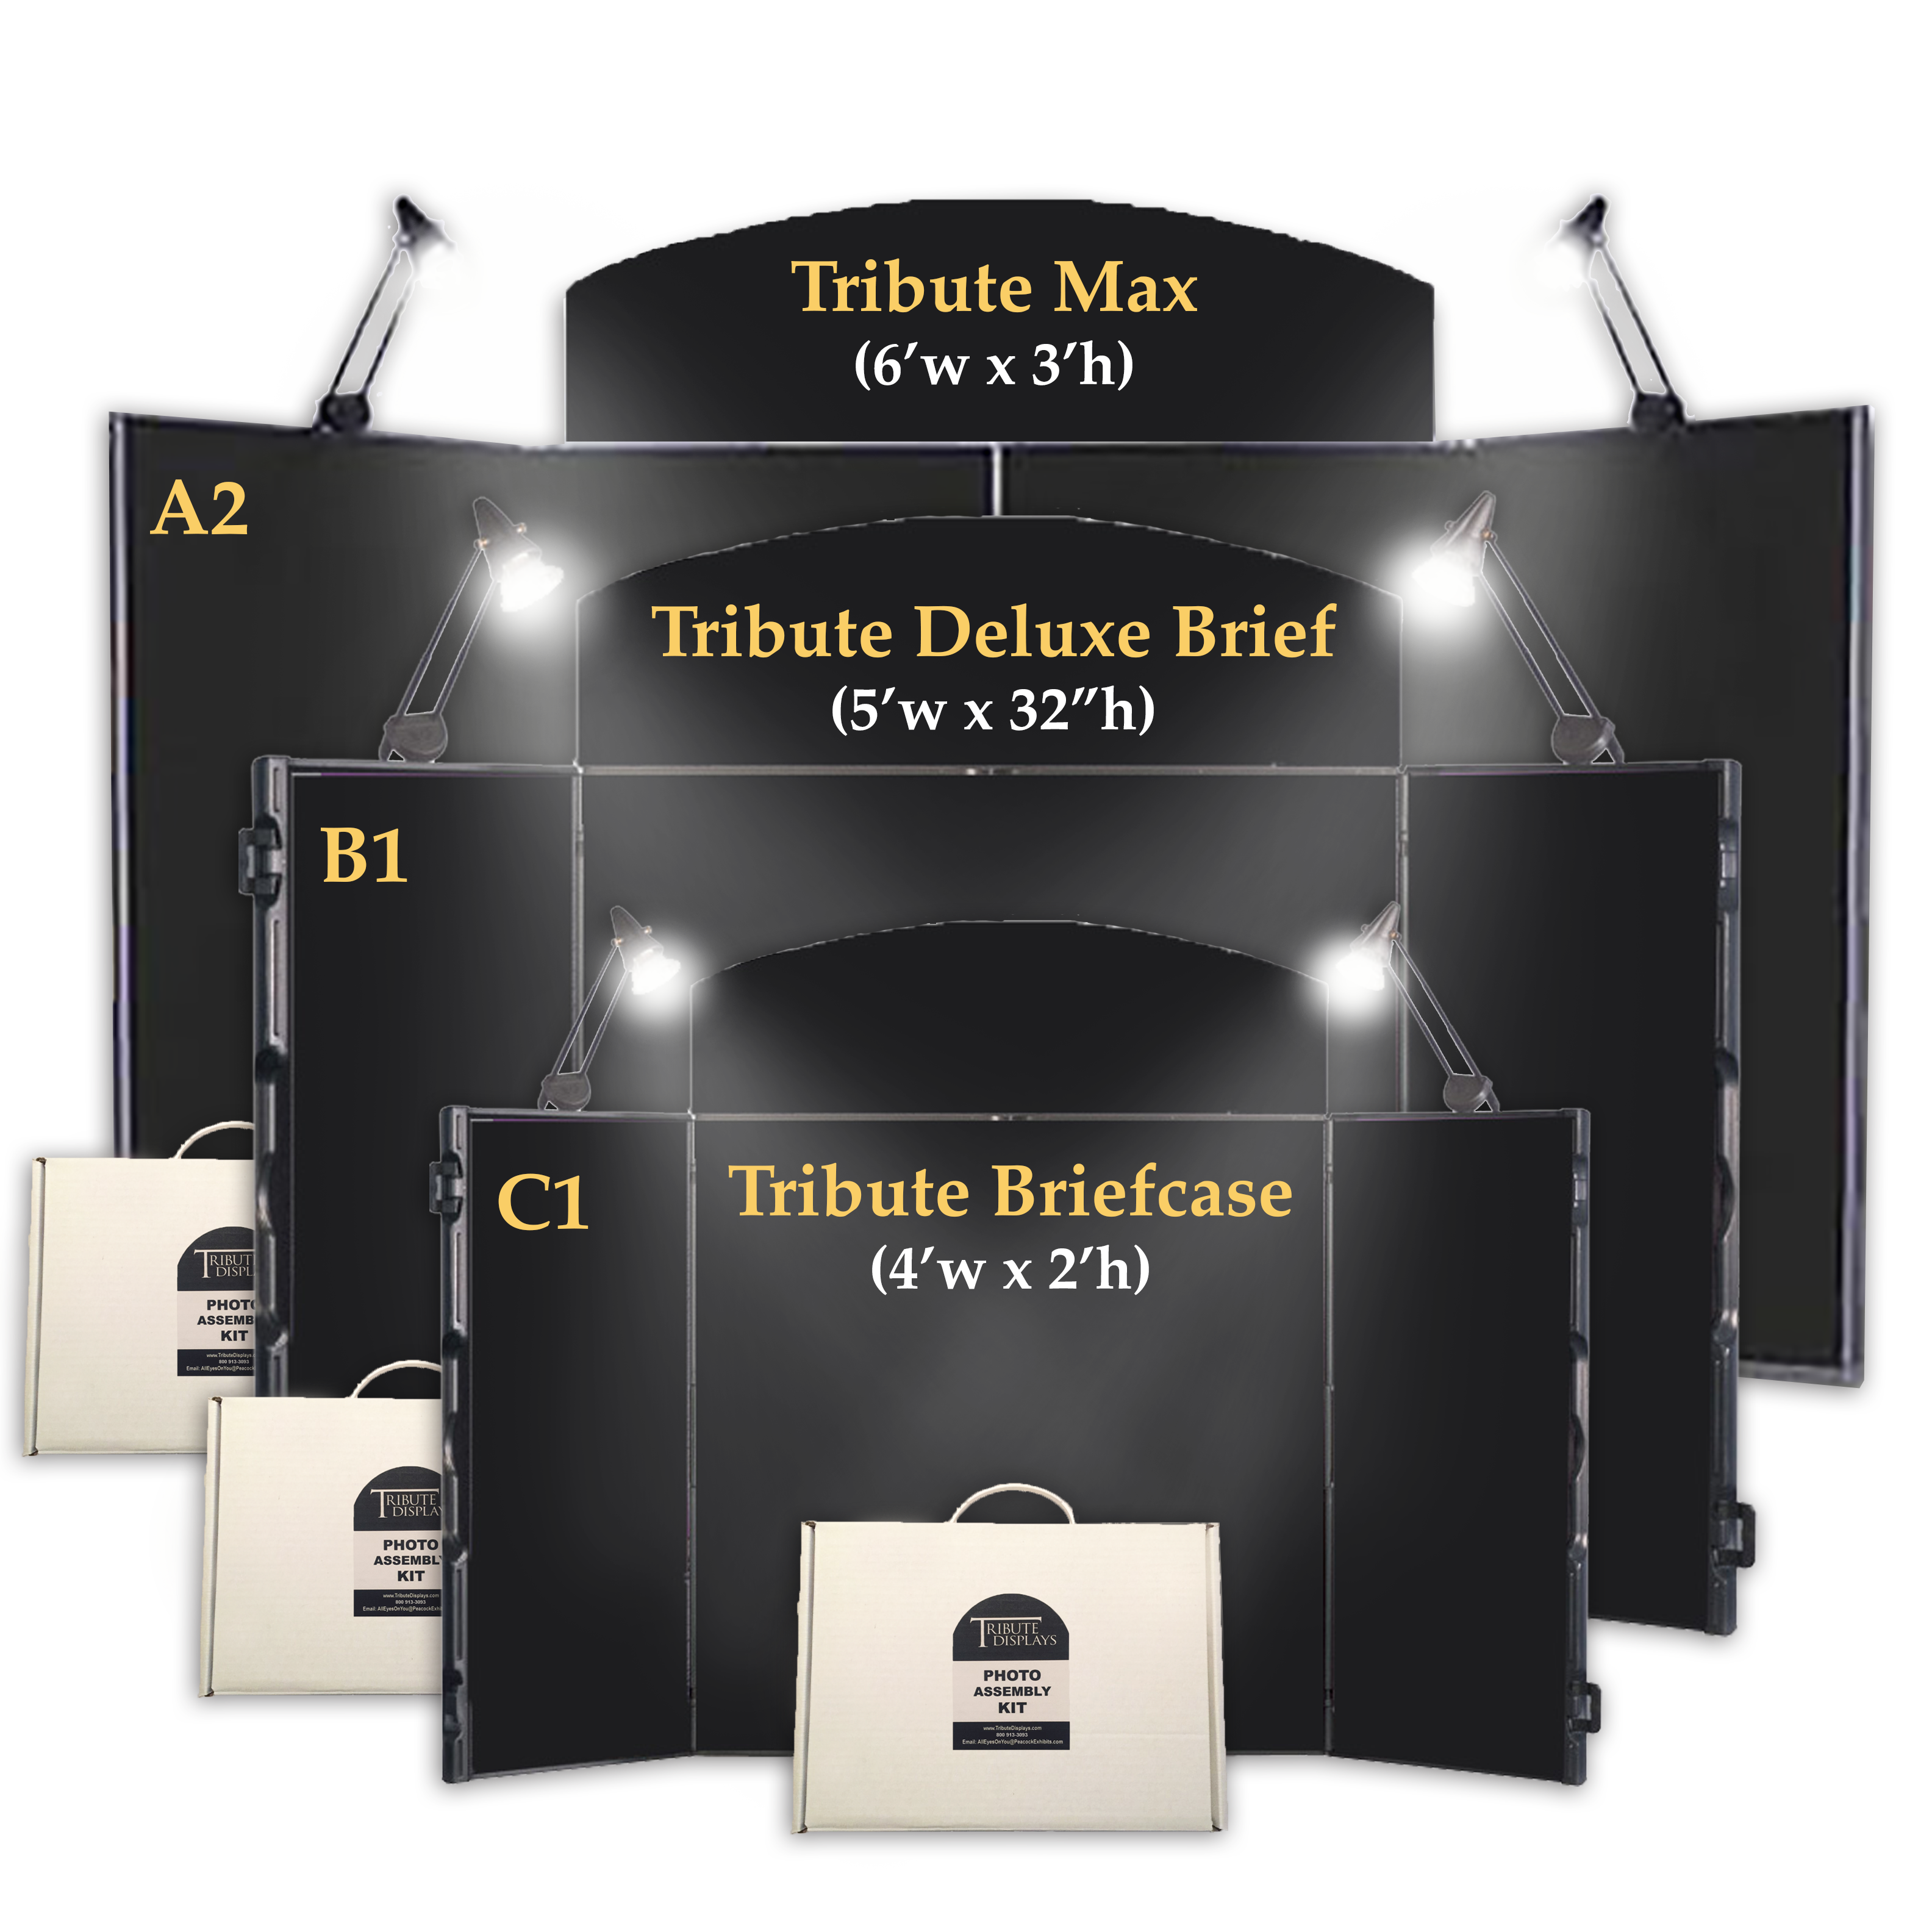 System Bundle "ABC": Tribute 3-Tier (Max + Deluxe + Briefcase)